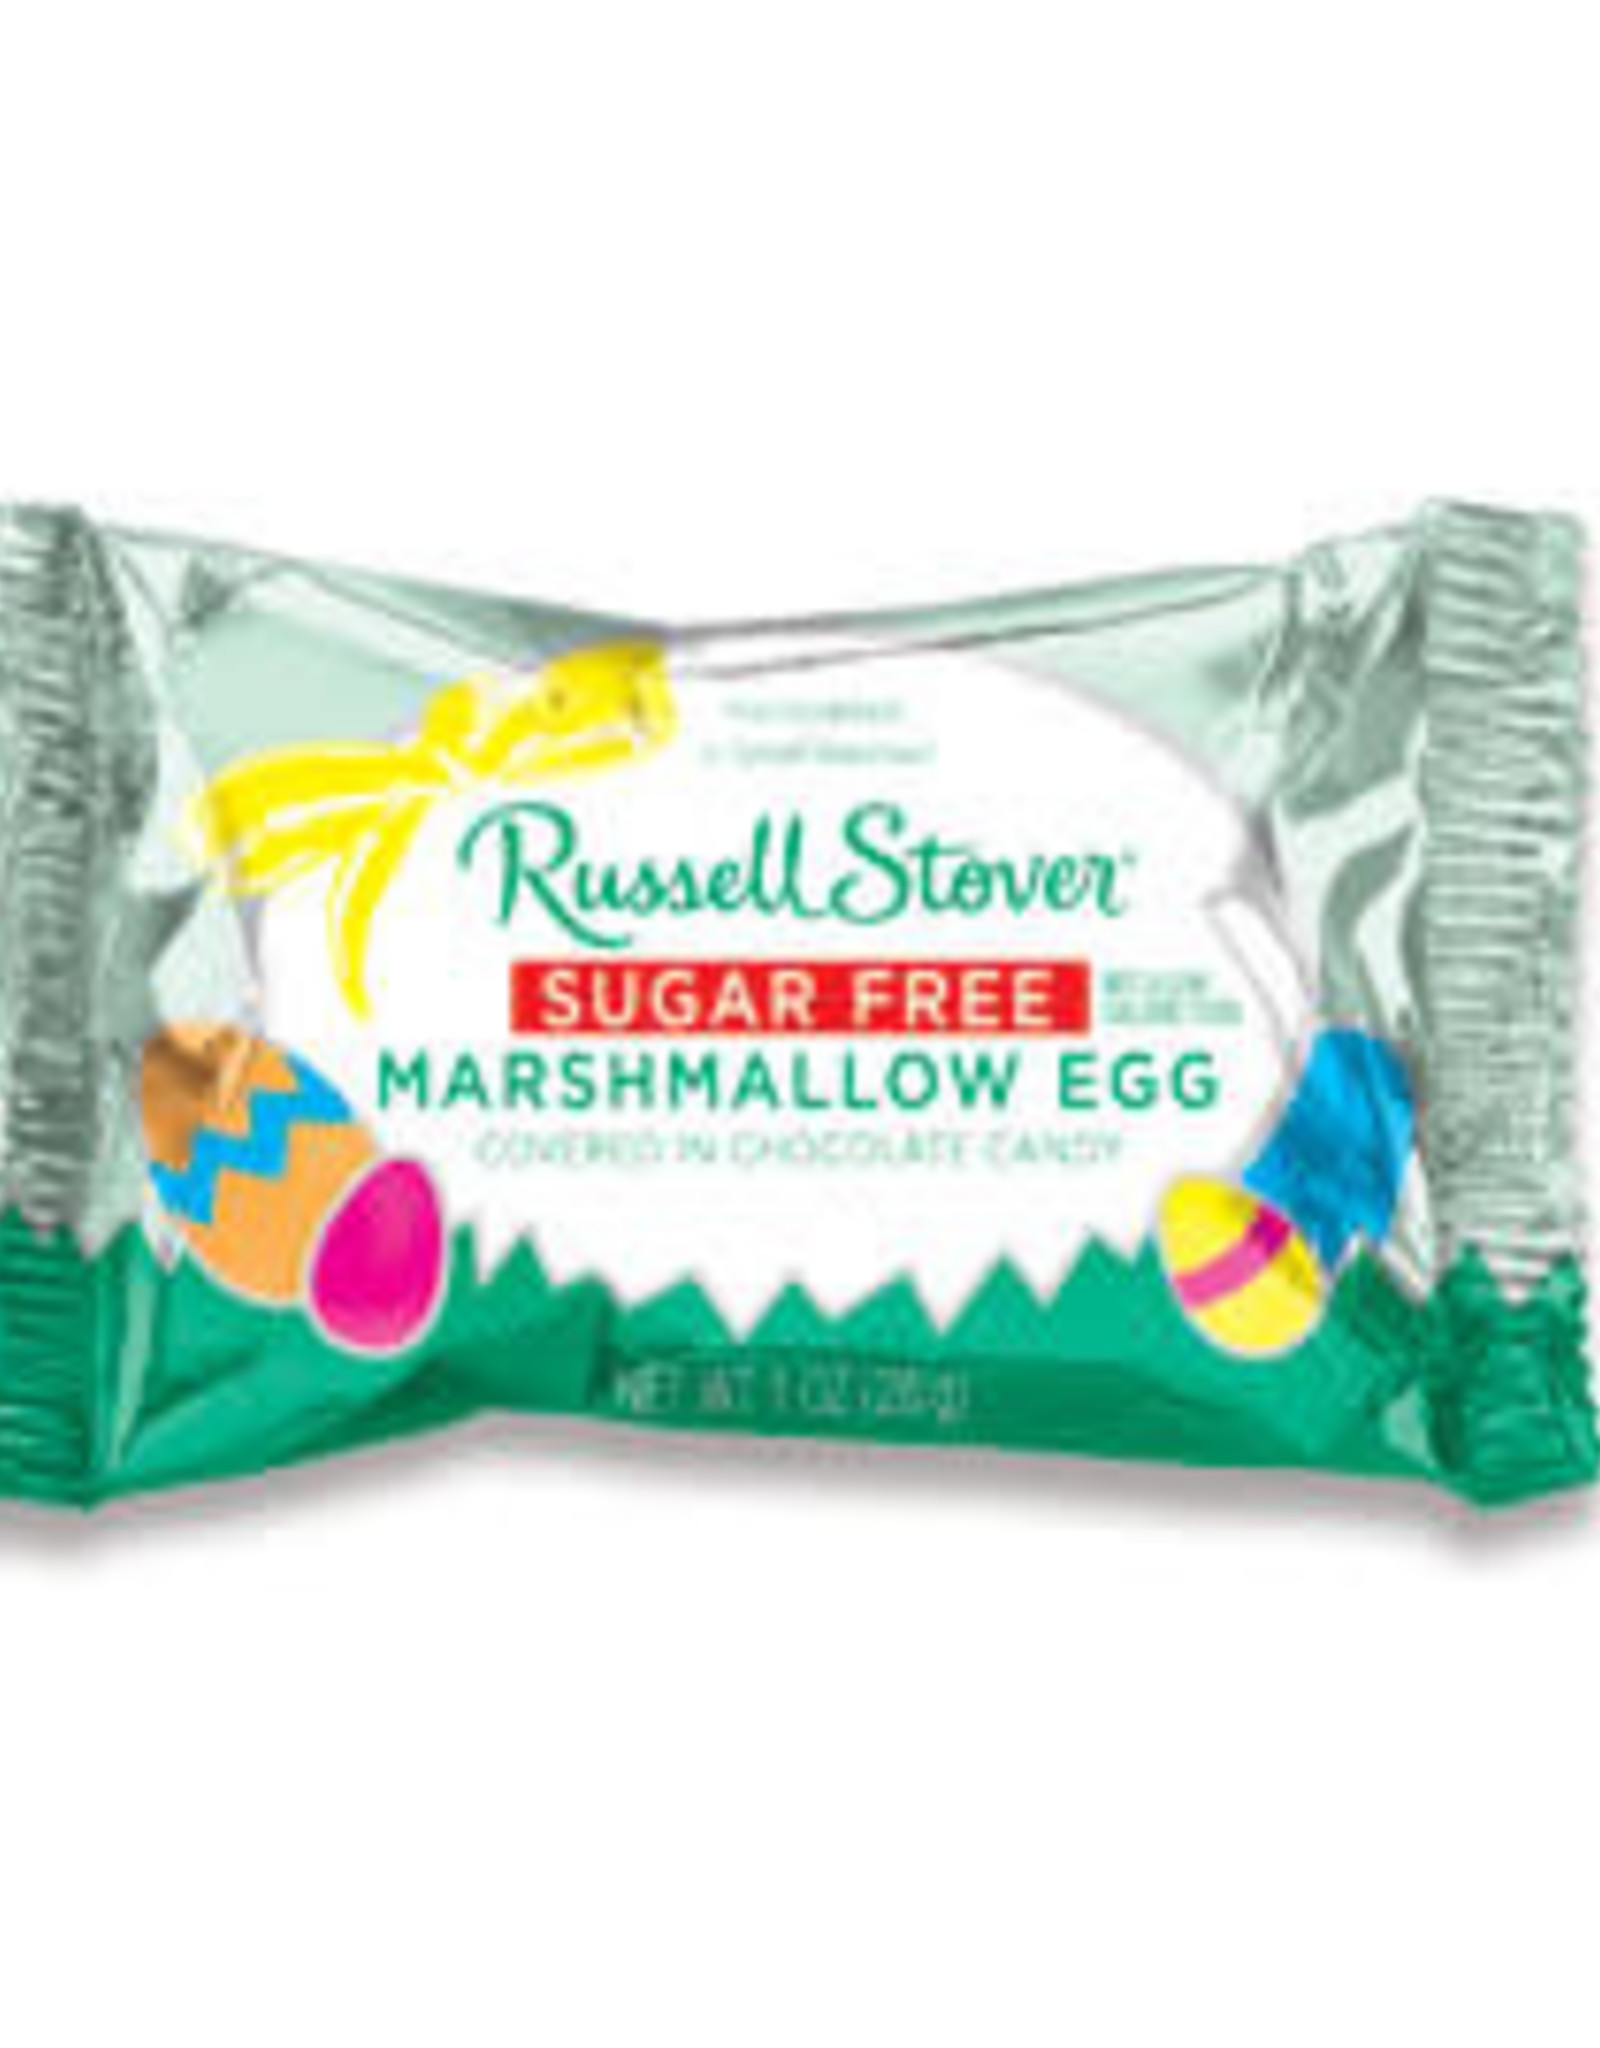 Russell Stover Russell Stover Mashmallow Egg